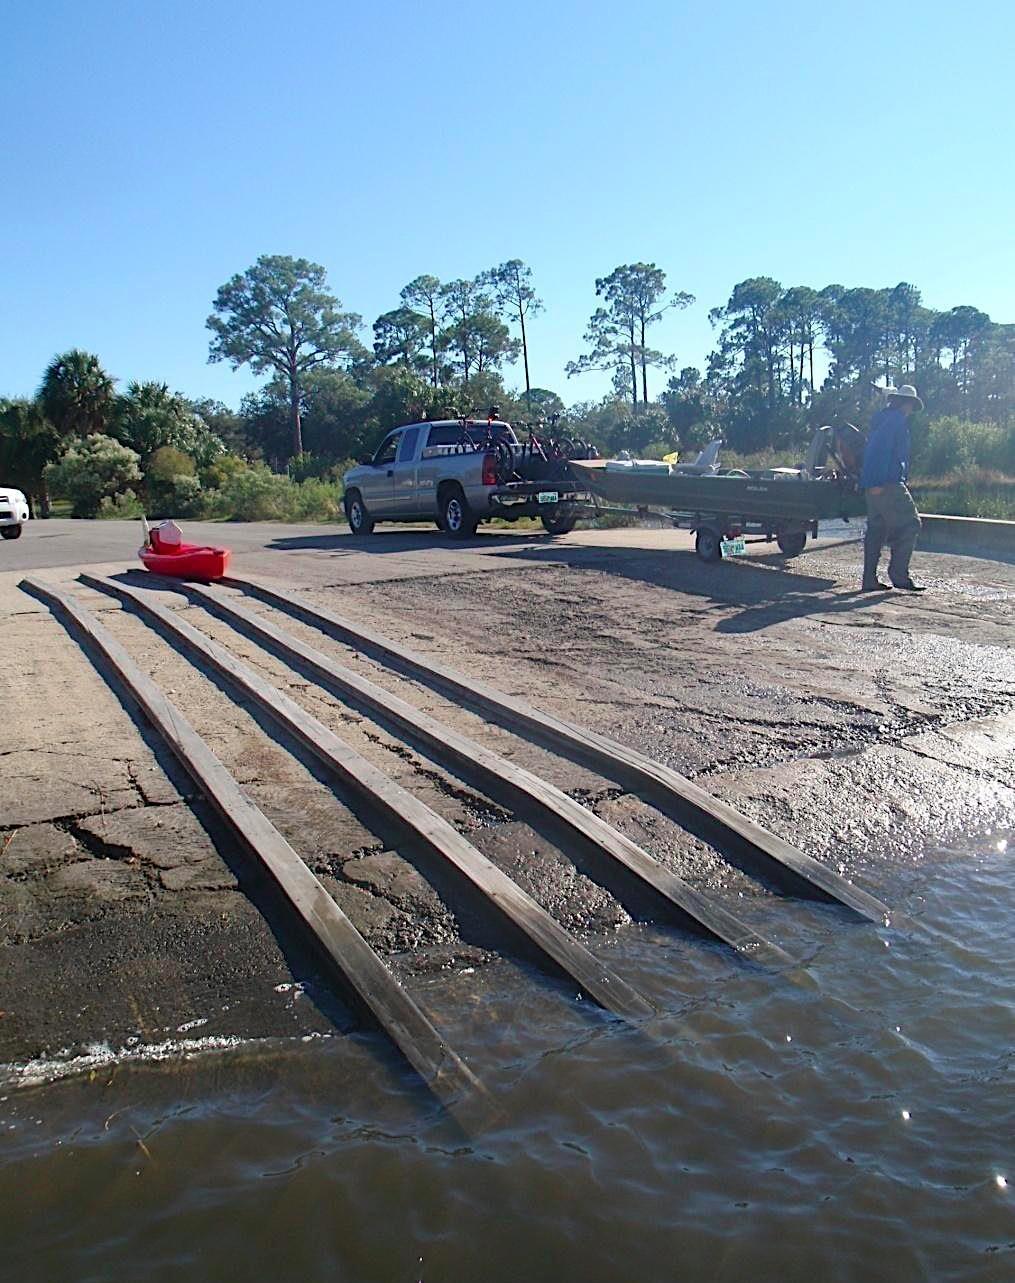 Four Cost-Effective Design Recommendations: #3 Modify Existing Structures: To reduce construction expenses, modify existing boat docks or shoreline structures to welcome both non-motorized and